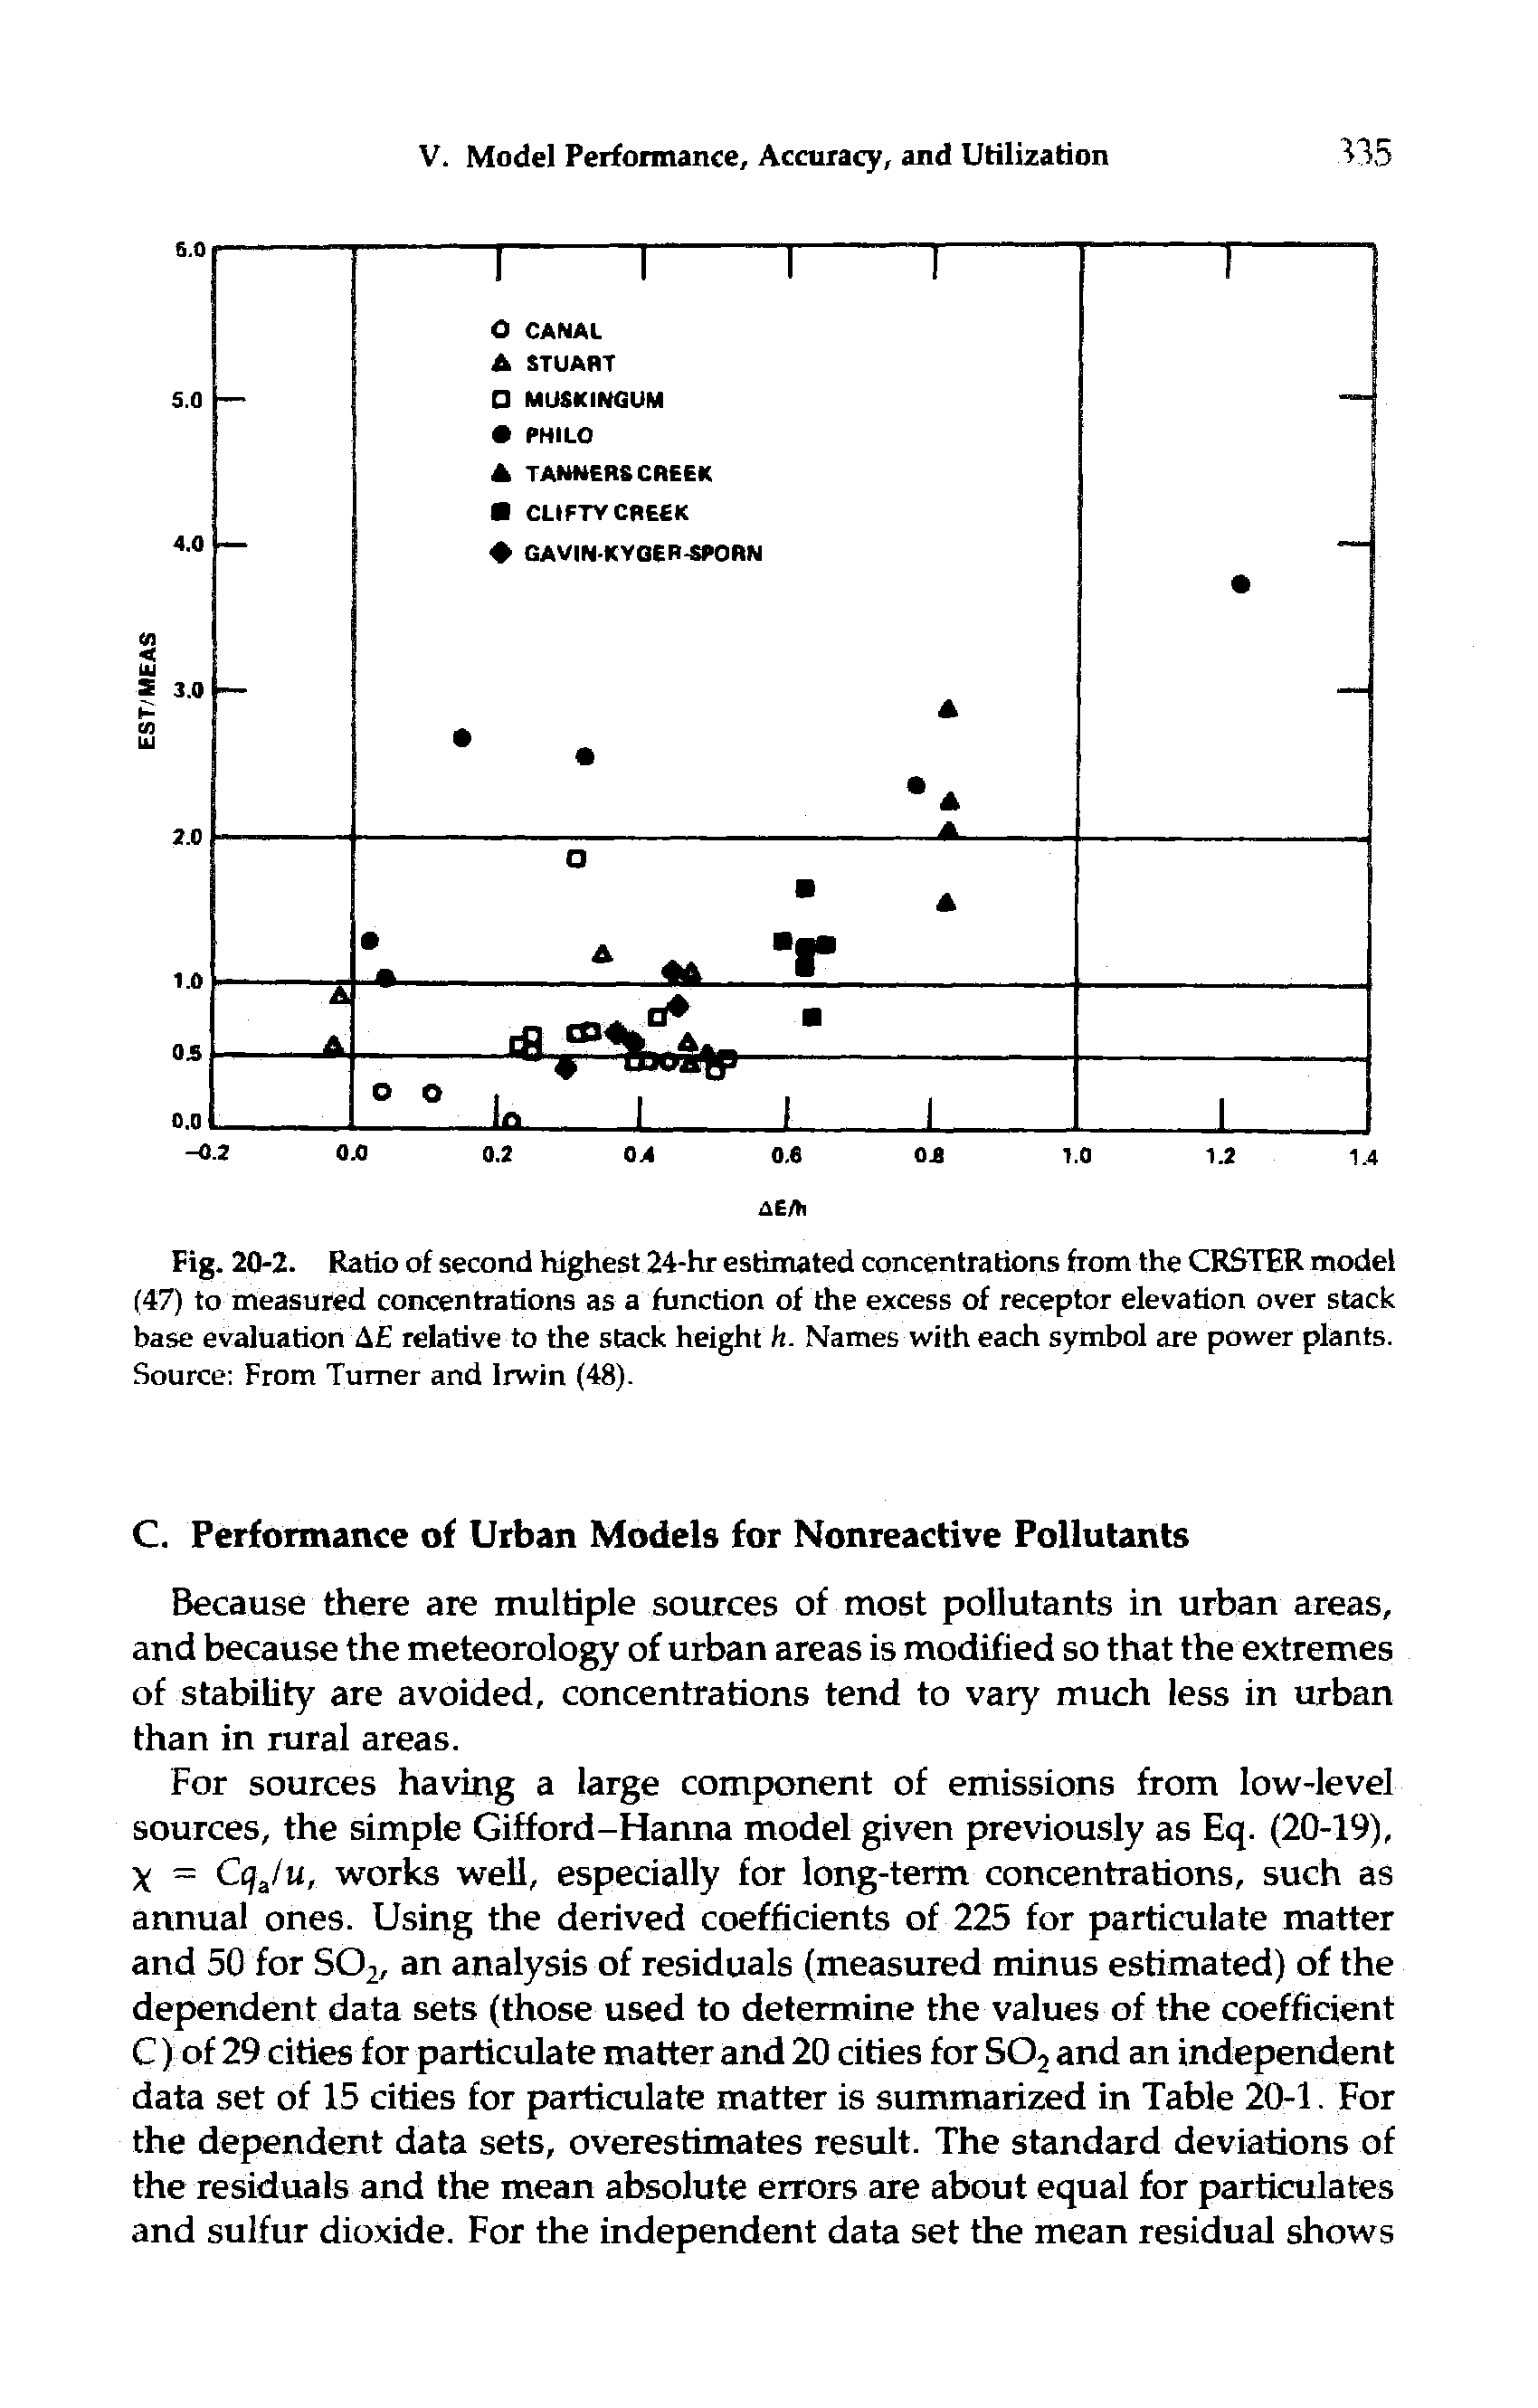 Fig. 20-2. Ratio of second highest 24-hr estimated concentrations from the CRSTER model (47) to measured concentrations as a function of the excess of receptor elevation over stack base evaluation A relative to the stack height h. Names with each symbol are power plants. Source From Turner and Irwin (48).